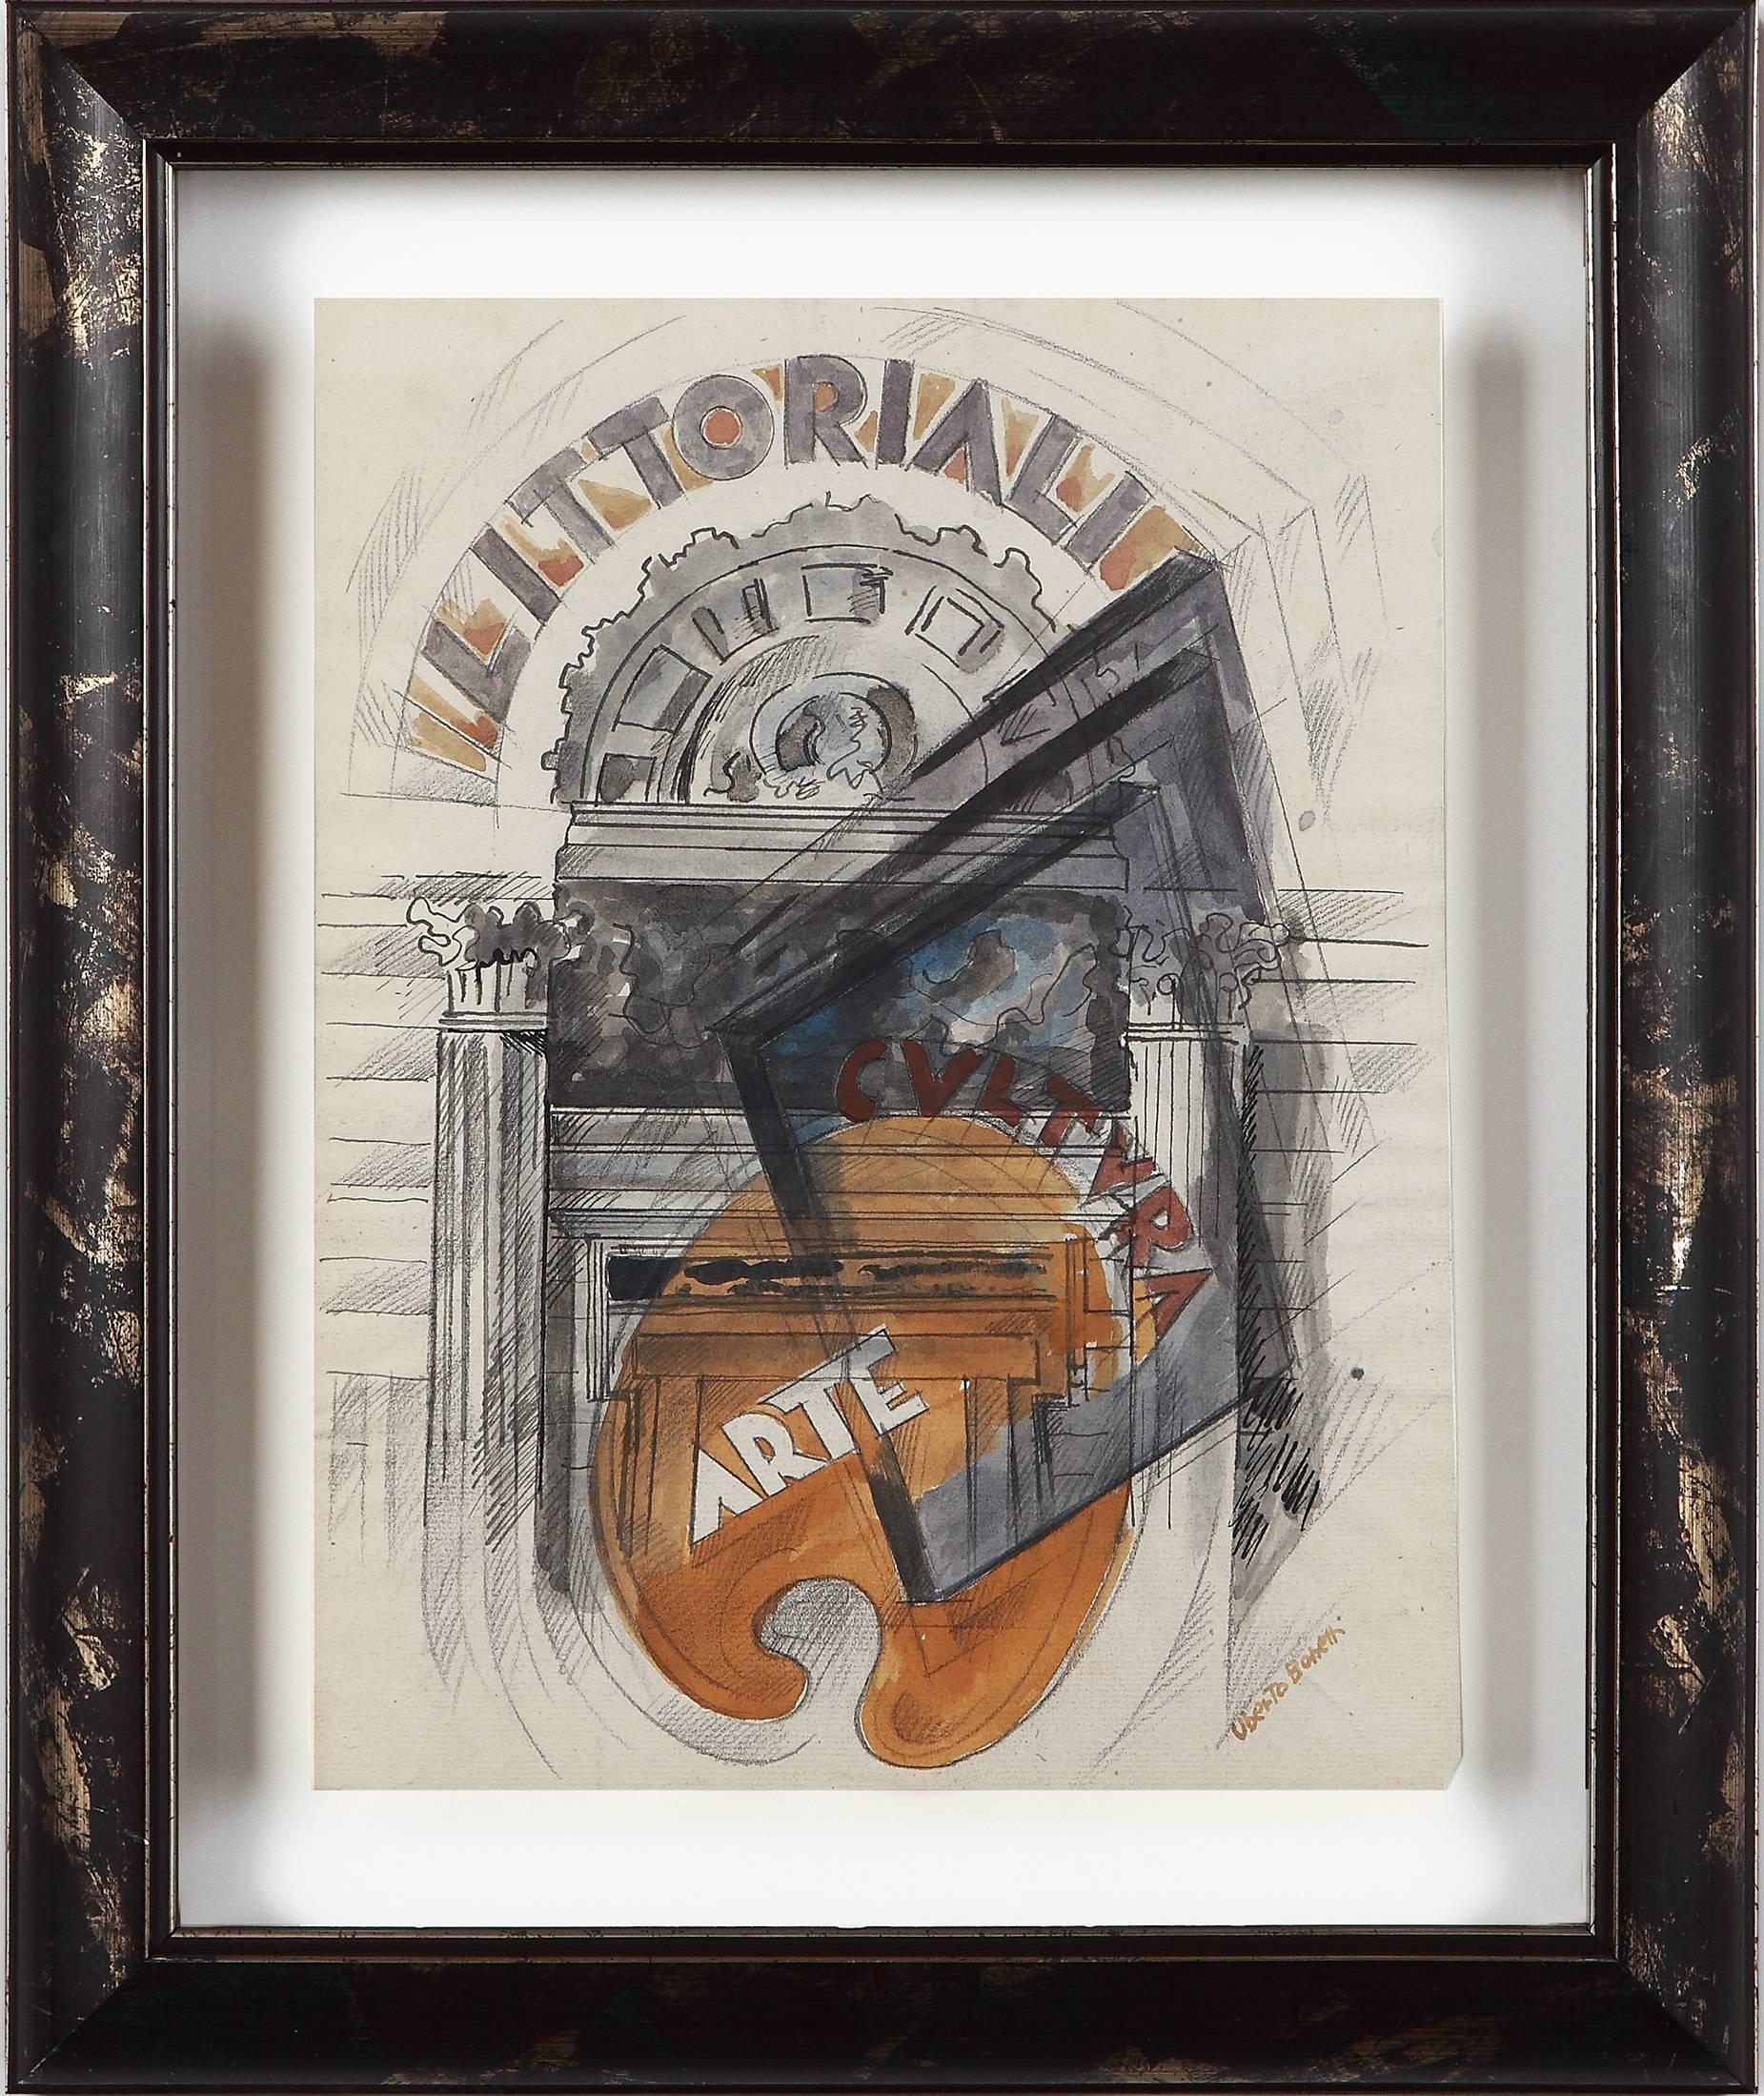 Watercolor, ink and graphite on paper, 1934-1935 by Uberto Bonetti, Italy. Signed lower right: Uberto Bonetti. Framed.
11.61 x 9.06 in ( 29,5 x 23 cm )

